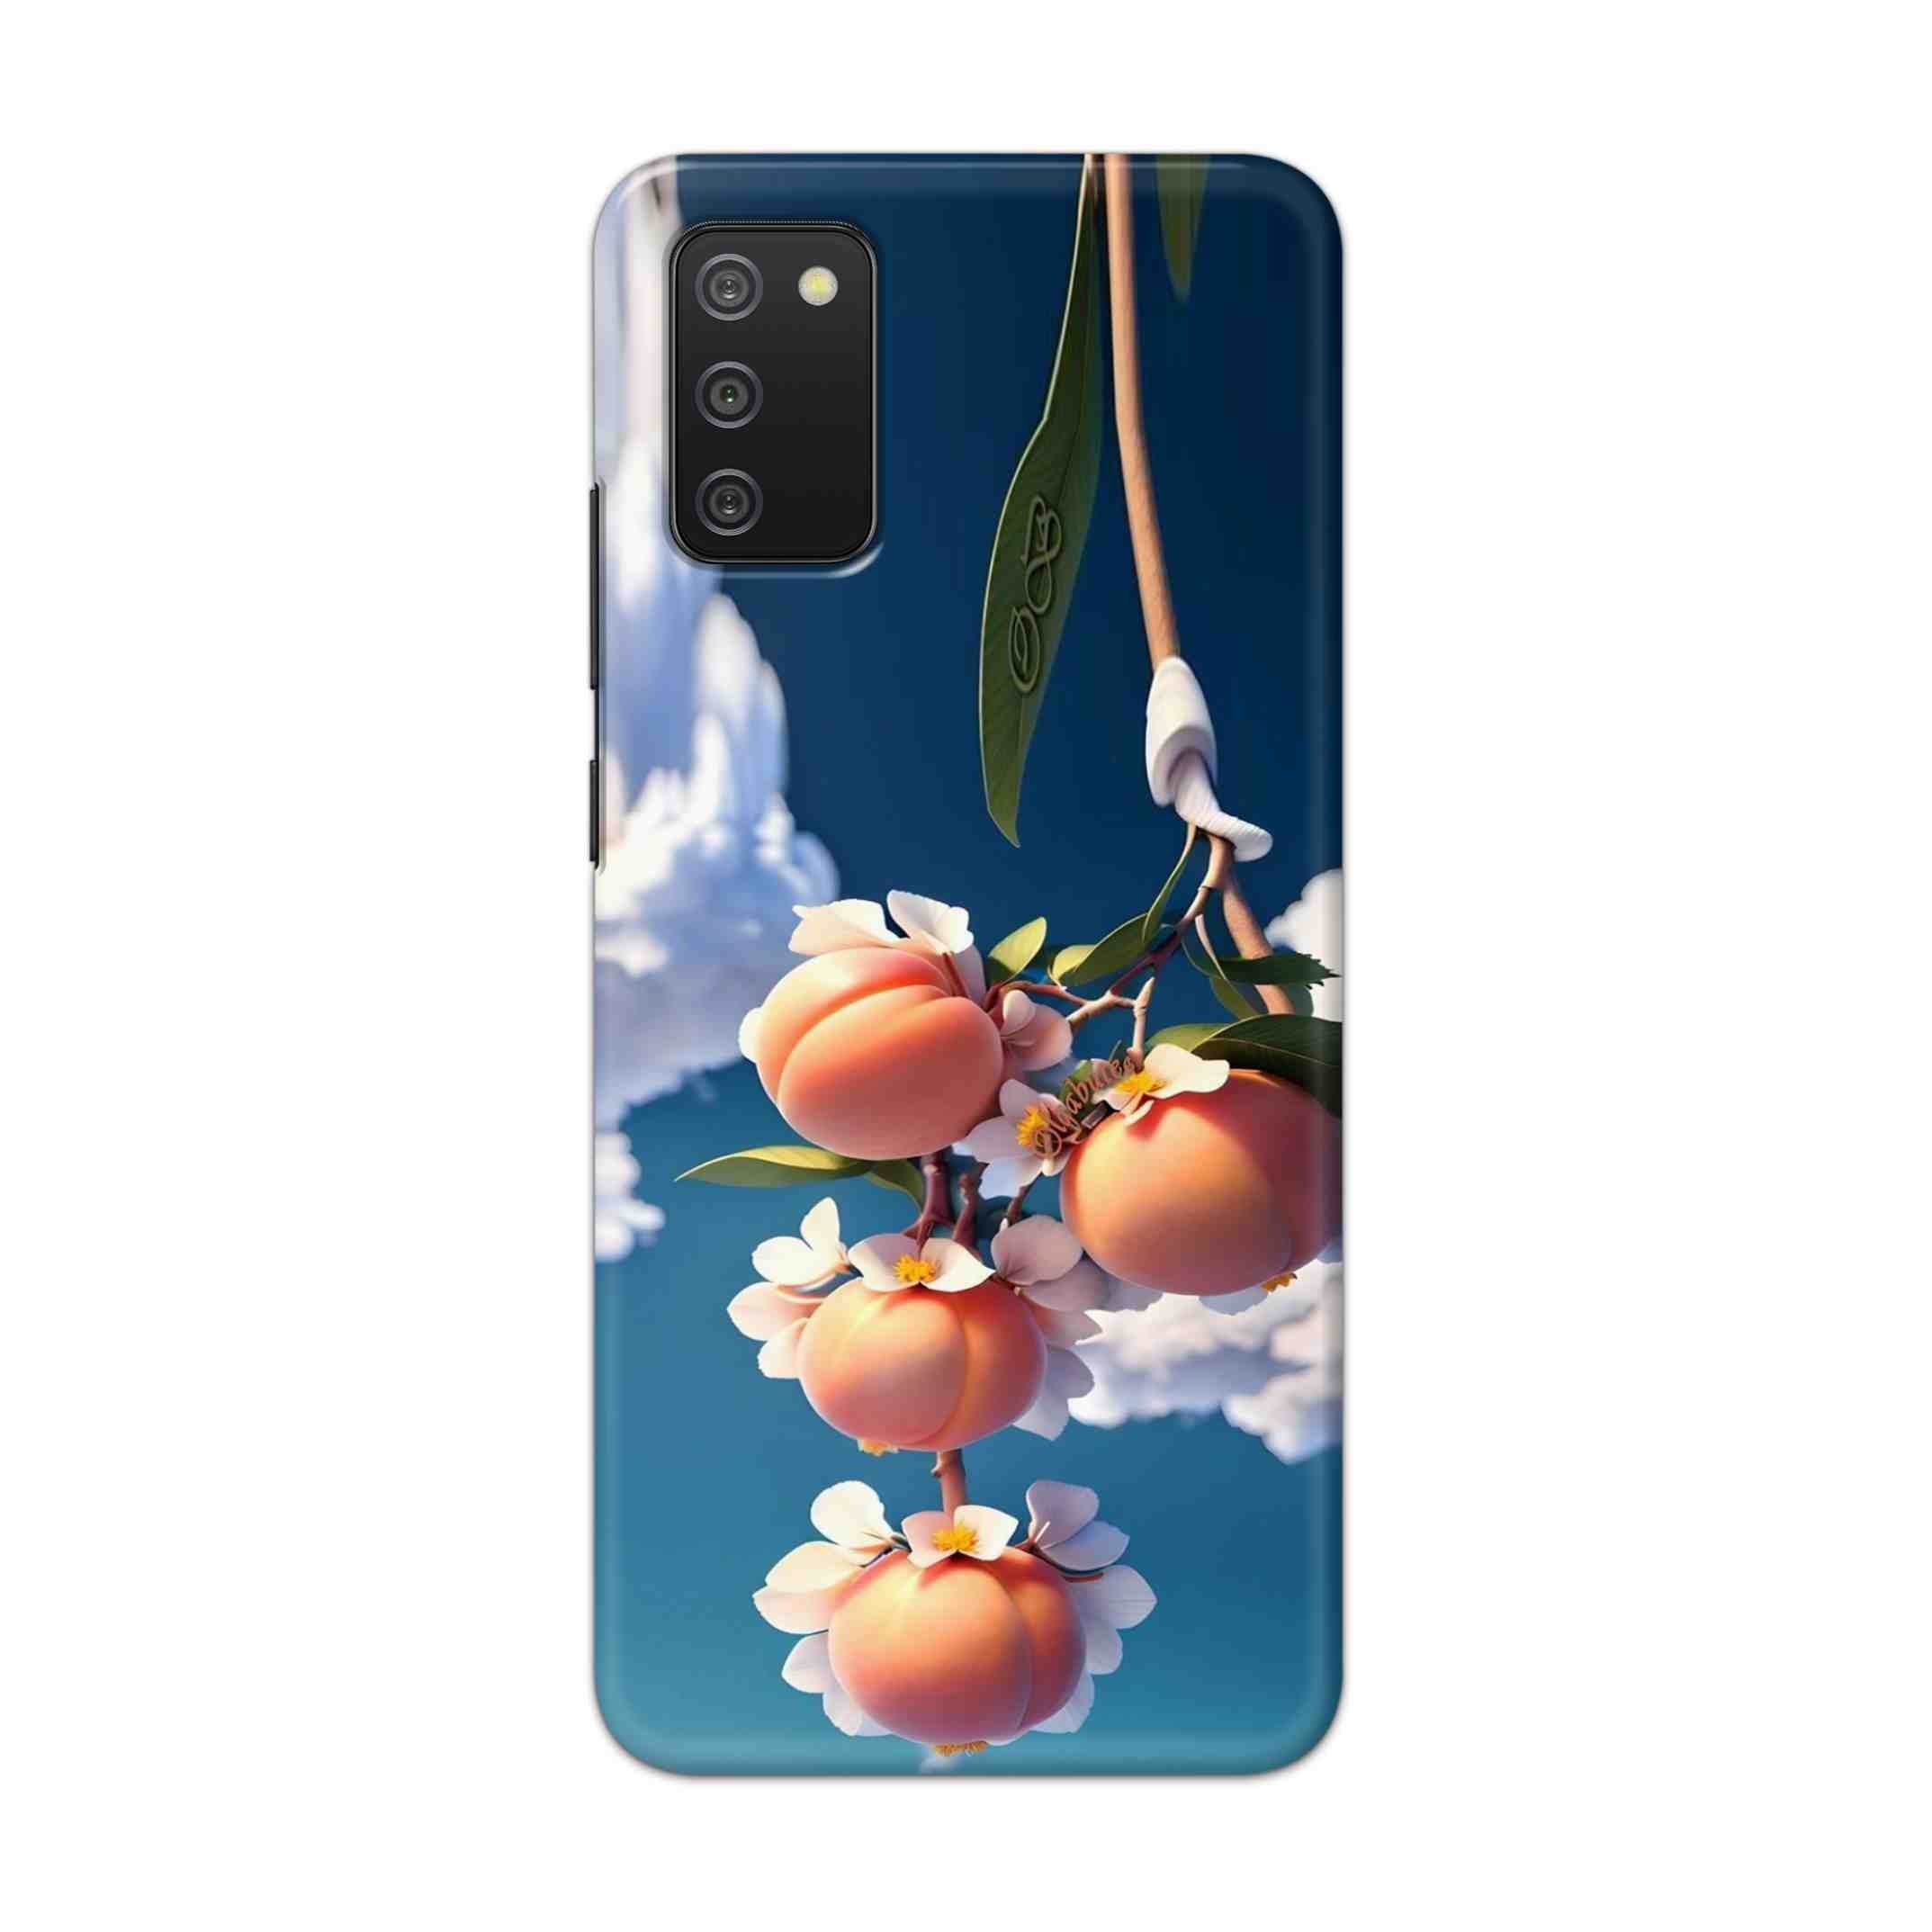 Buy Fruit Hard Back Mobile Phone Case Cover For Samsung Galaxy M02s Online